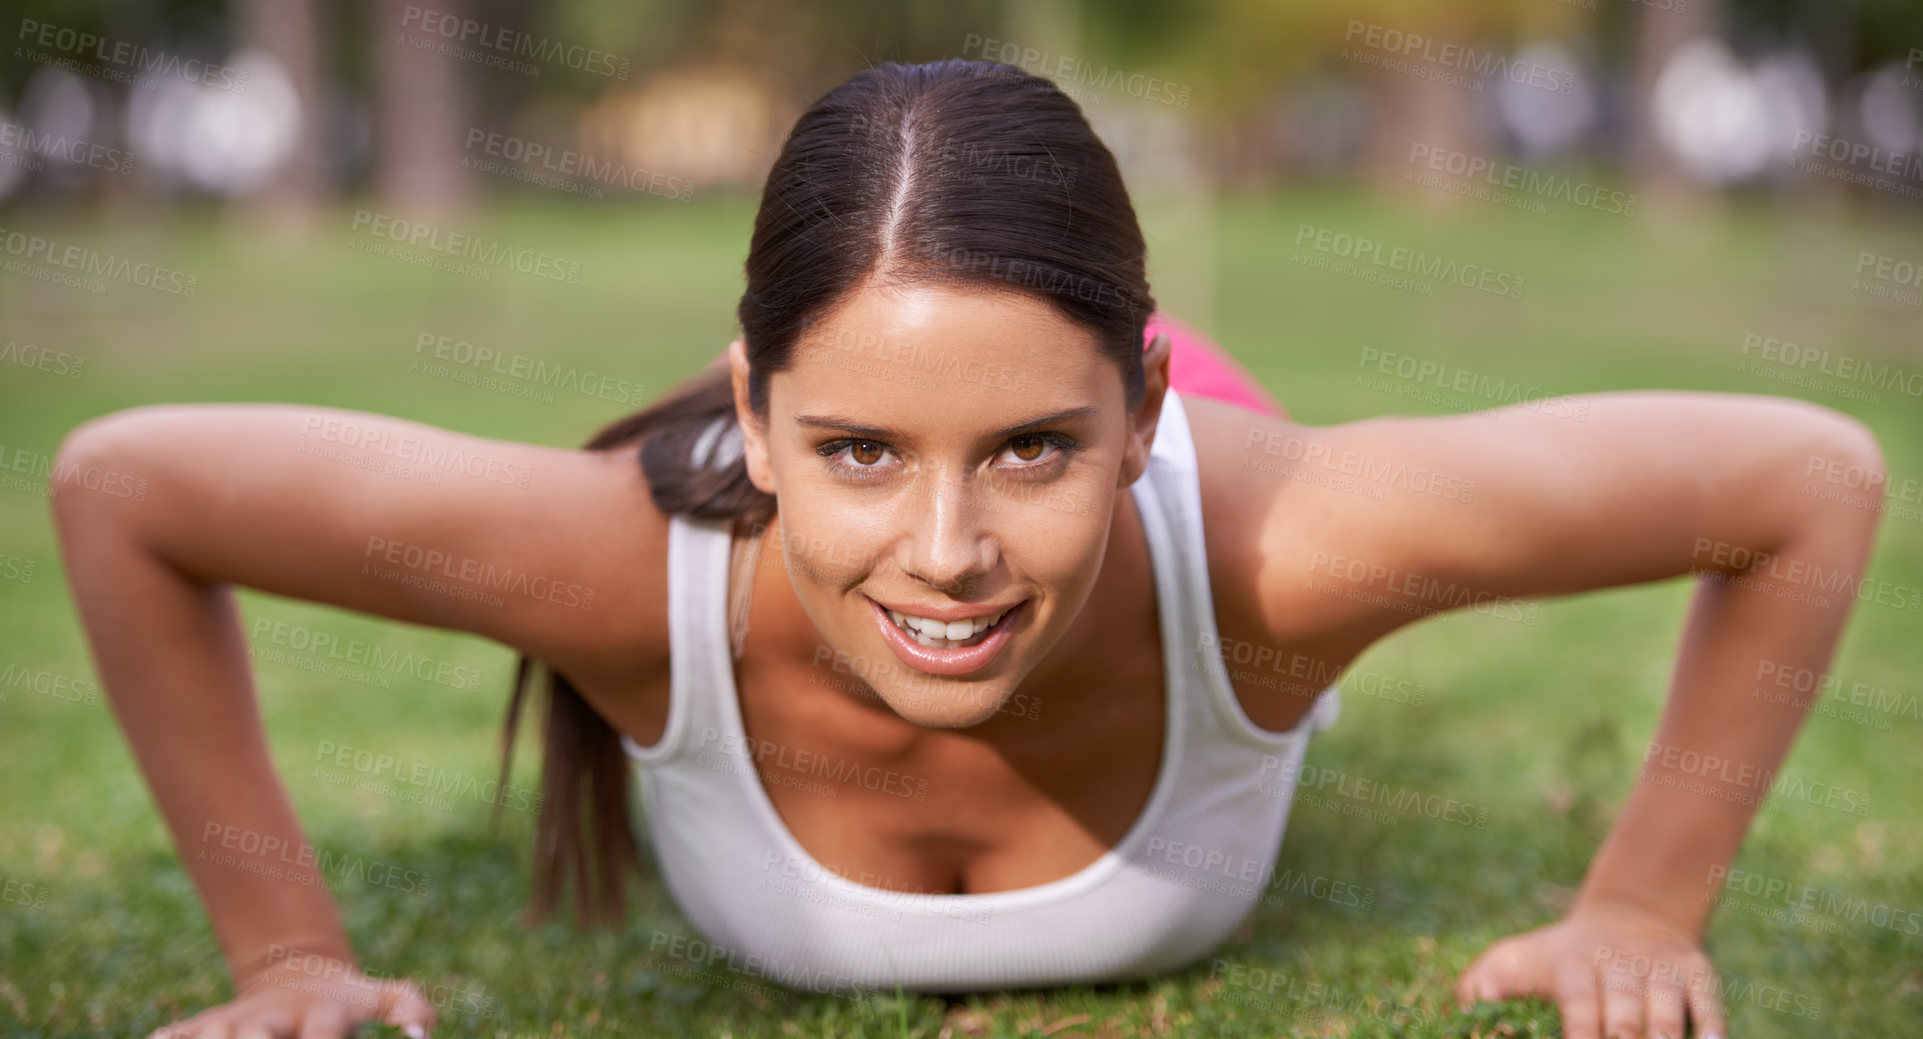 Buy stock photo Push up, park or portrait of woman in fitness training, exercise or workout for wellness, routine or balance. Ready, smile or happy athlete on grass for strong arm muscles, activity or body mobility